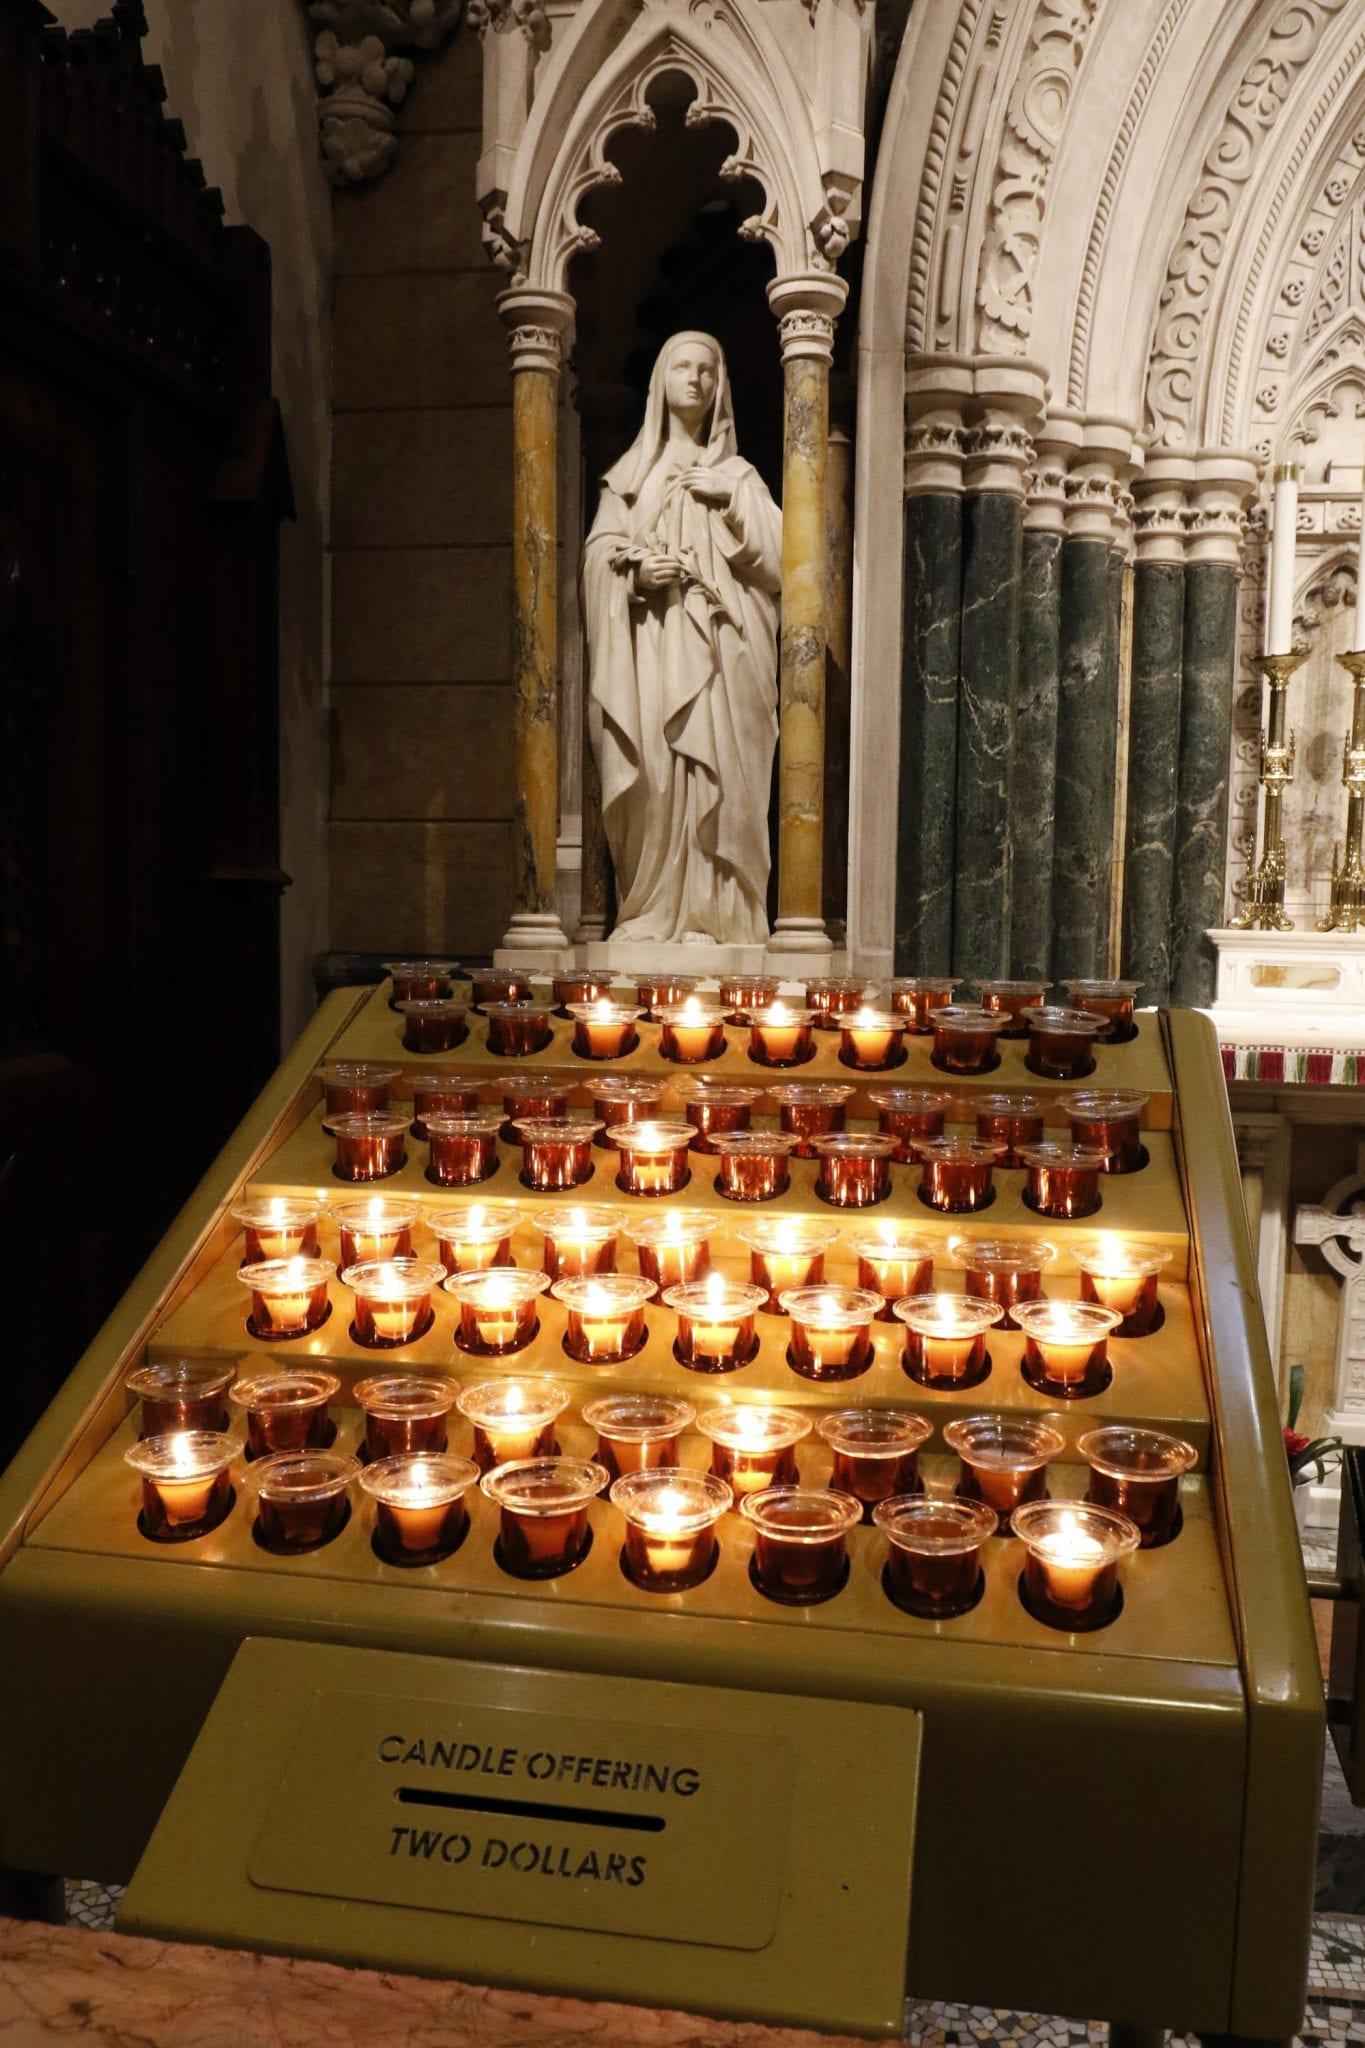 U.S. cathedrals rely on state-of-art fire prevention, remain vigilant